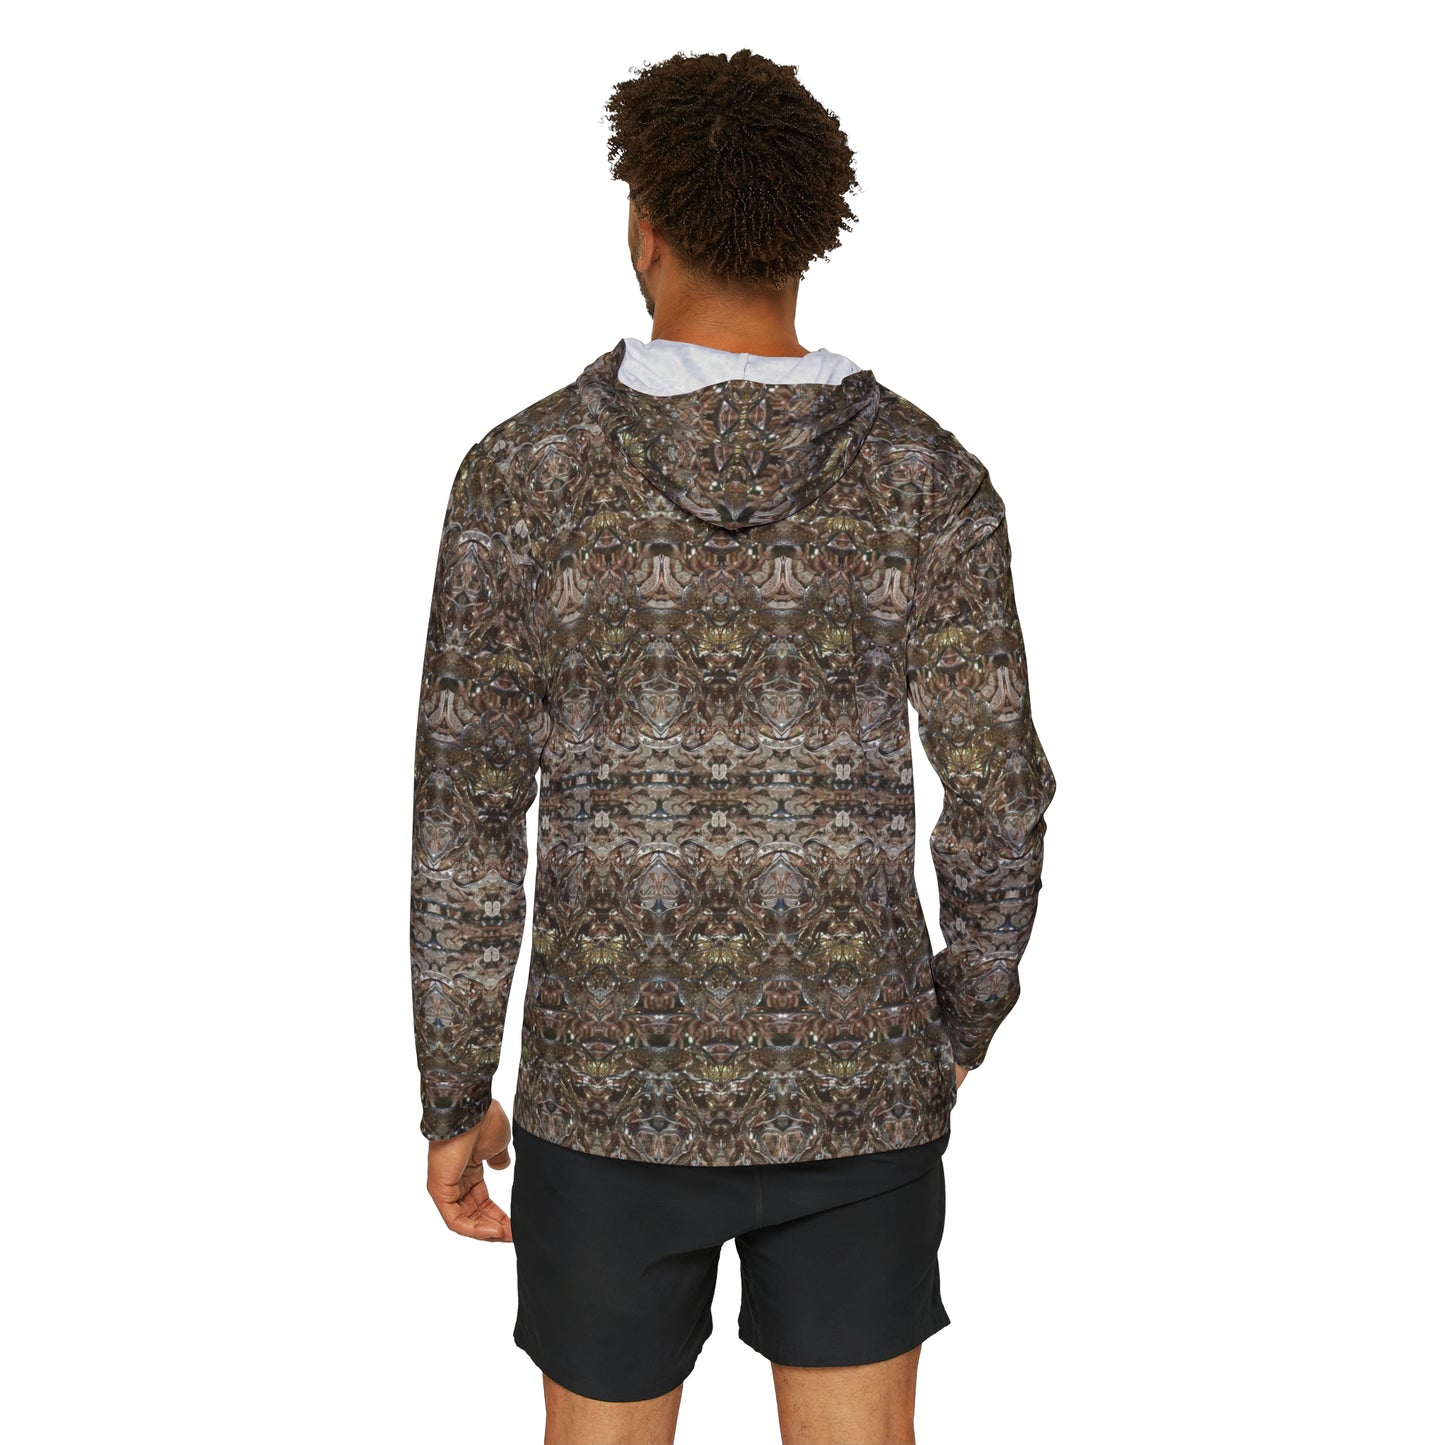 Athletic Activewear Hoodie (His/They)(Samhain Dream Thaw 13 of 15 Tredecim ex Quindecim) RJSTH@w2023 RJS